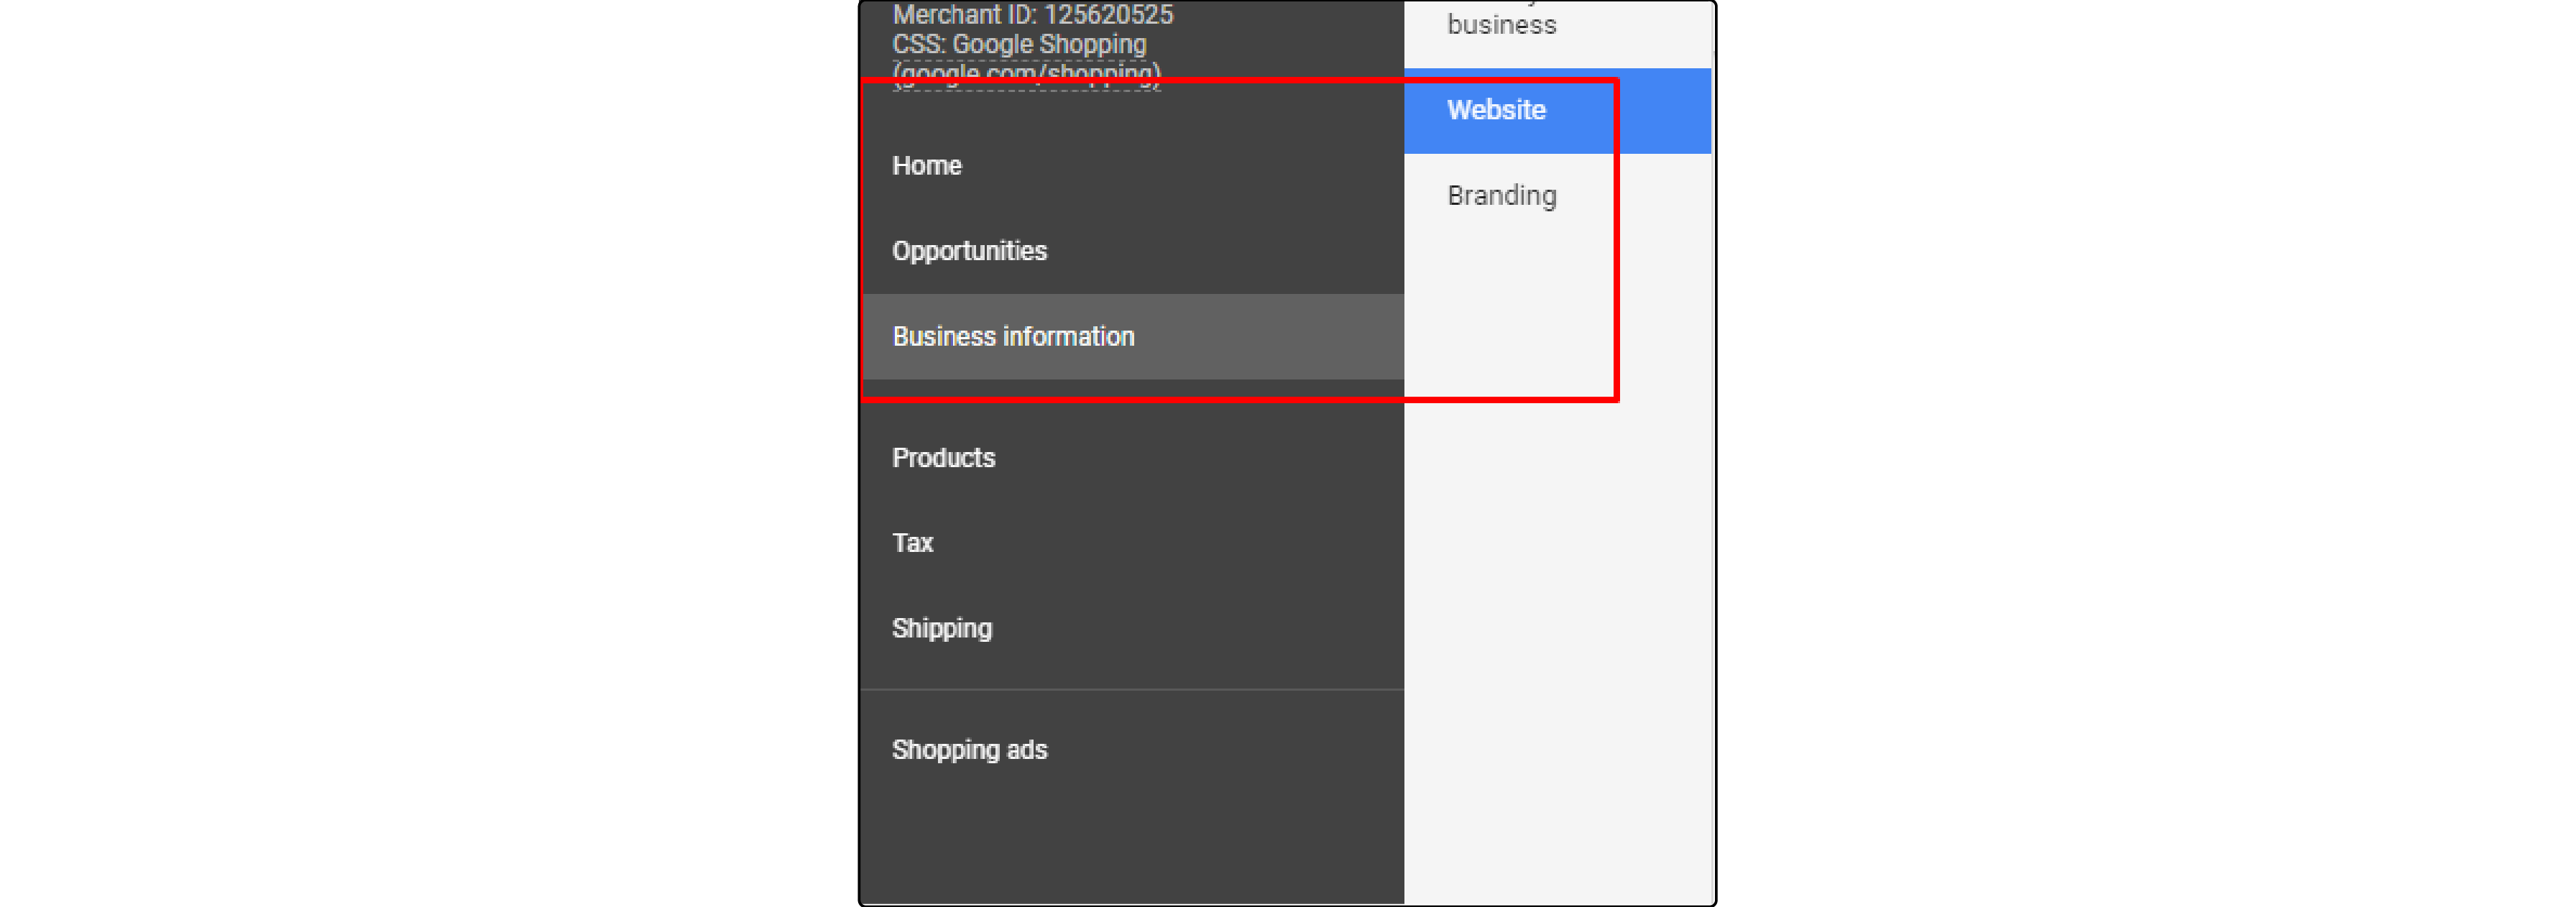 Verifying Website in Magento Google Shopping Feed